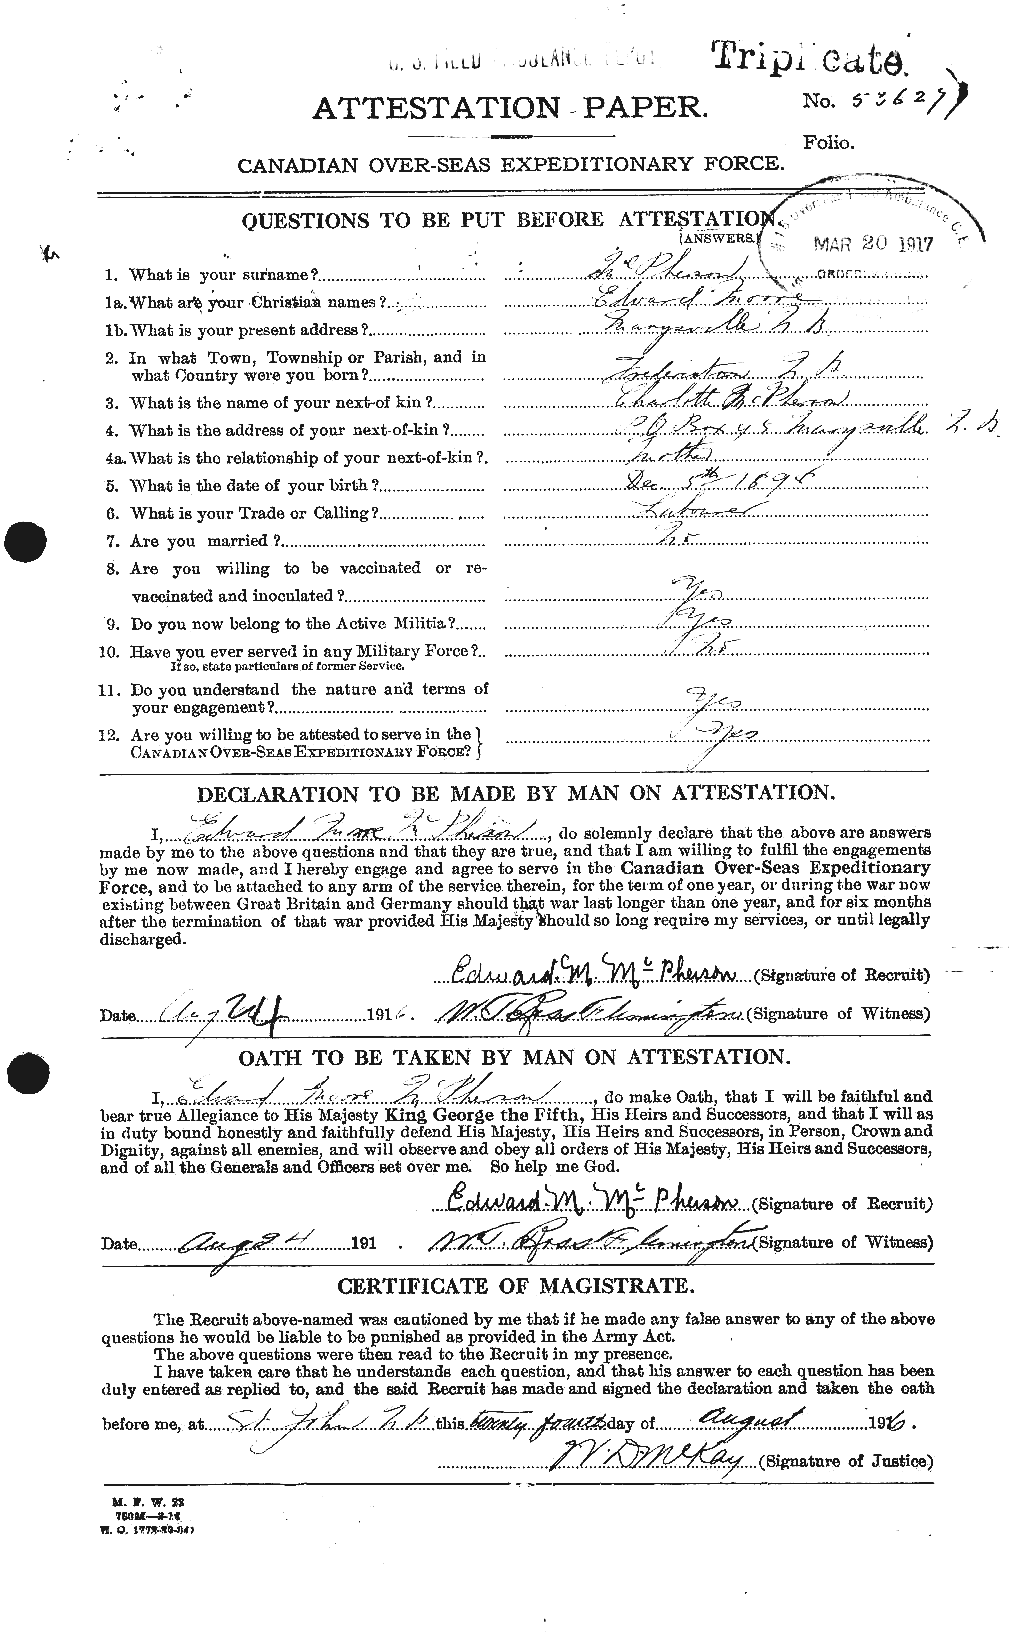 Personnel Records of the First World War - CEF 541520a